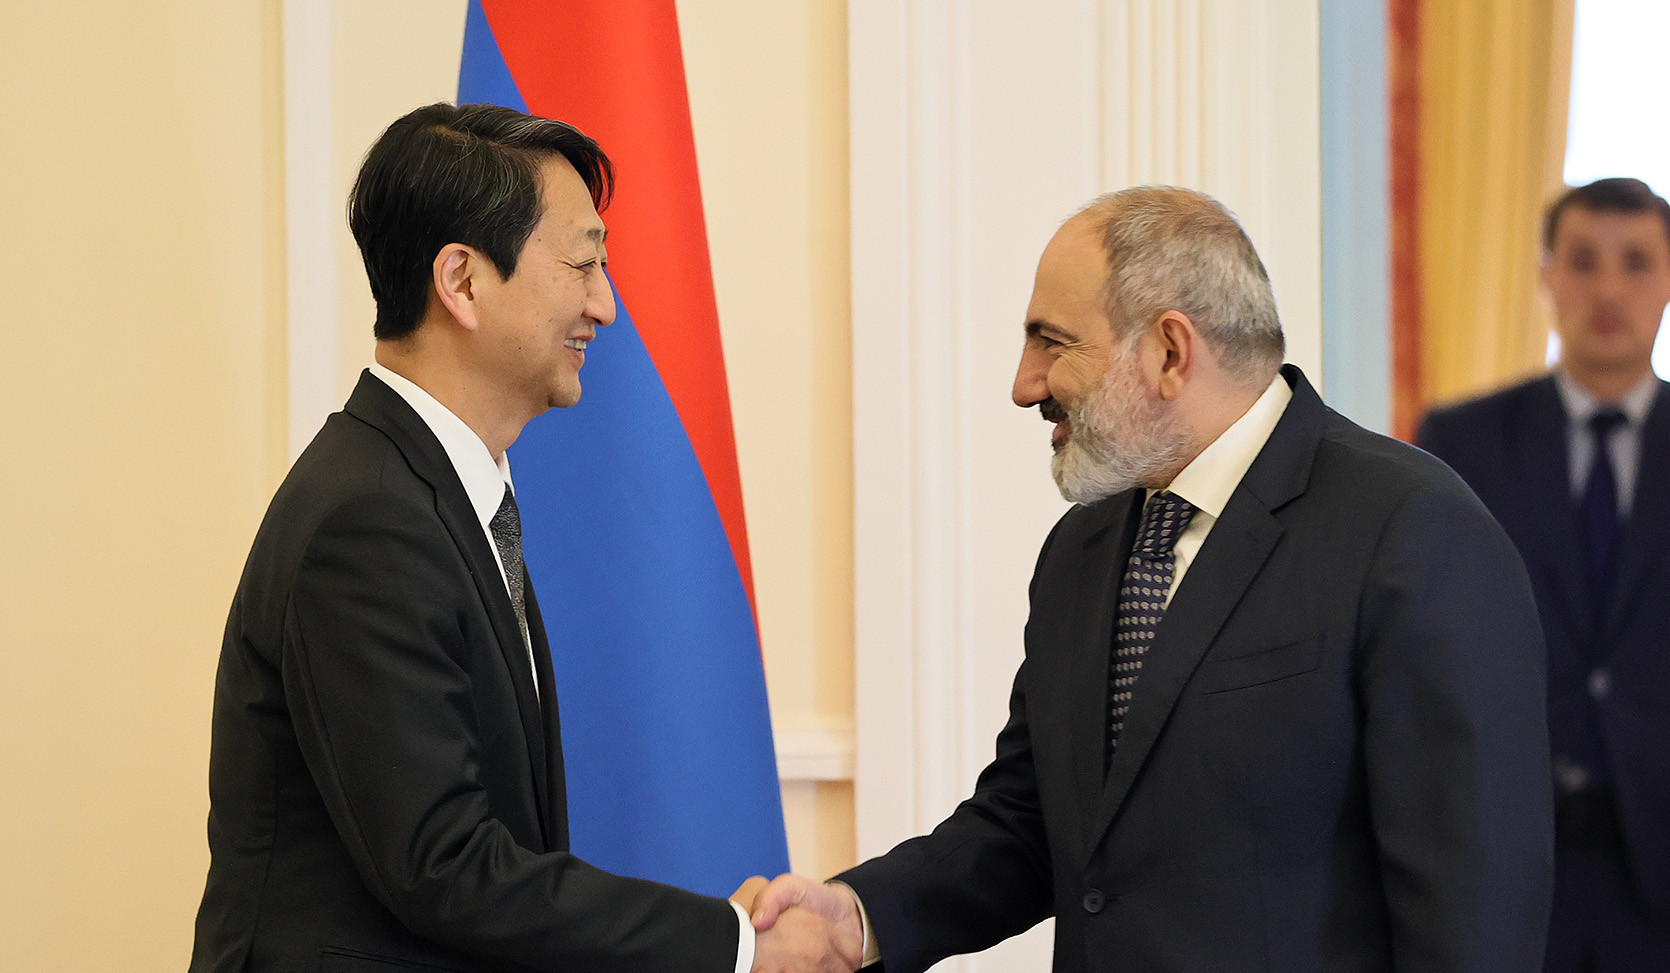 Prime Minister receives the Minister of Trade of the Republic of Korea